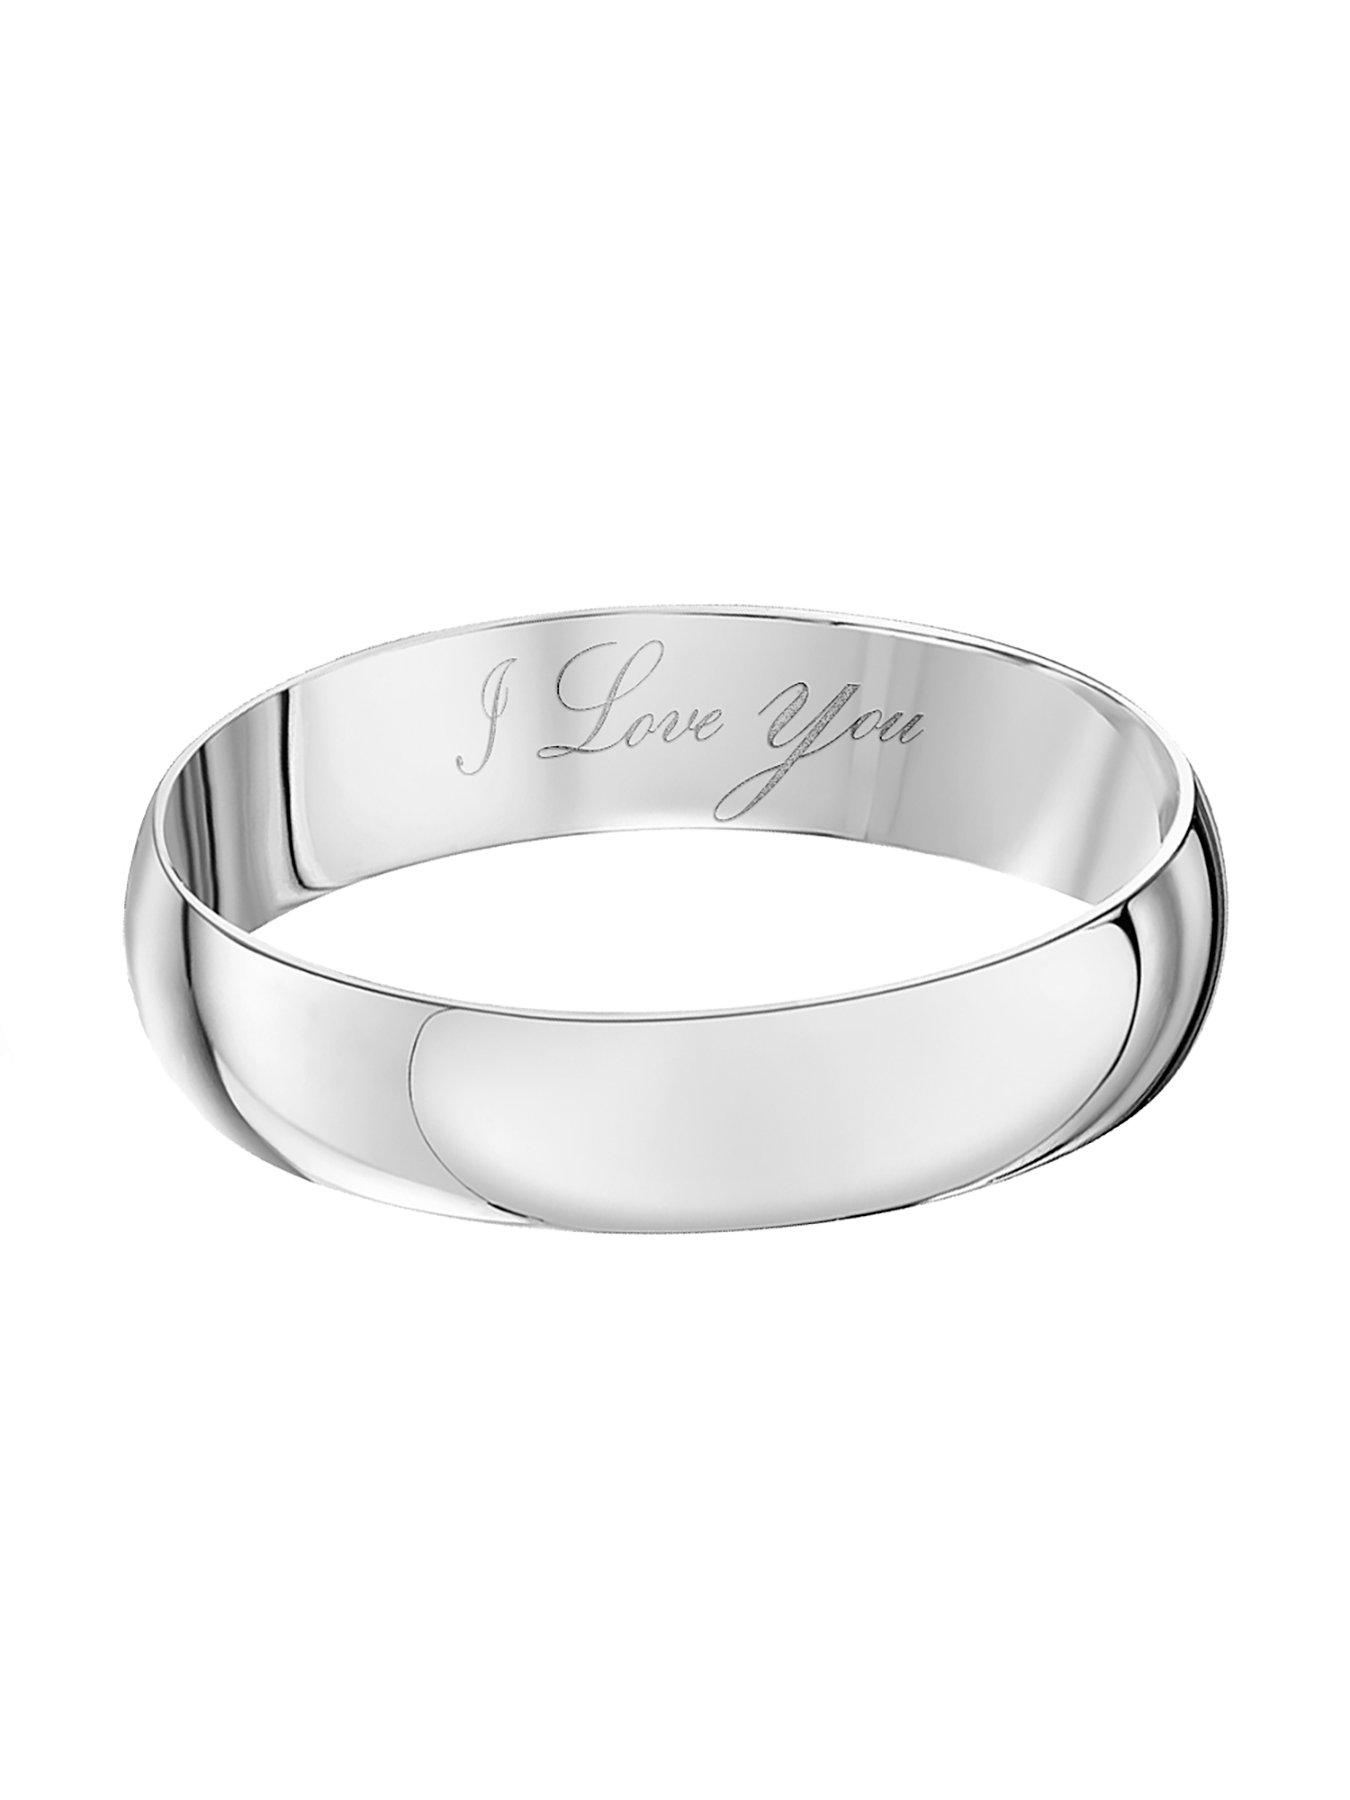 Love GOLD 9ct White Gold Personalised Band Ring 3m | very.co.uk